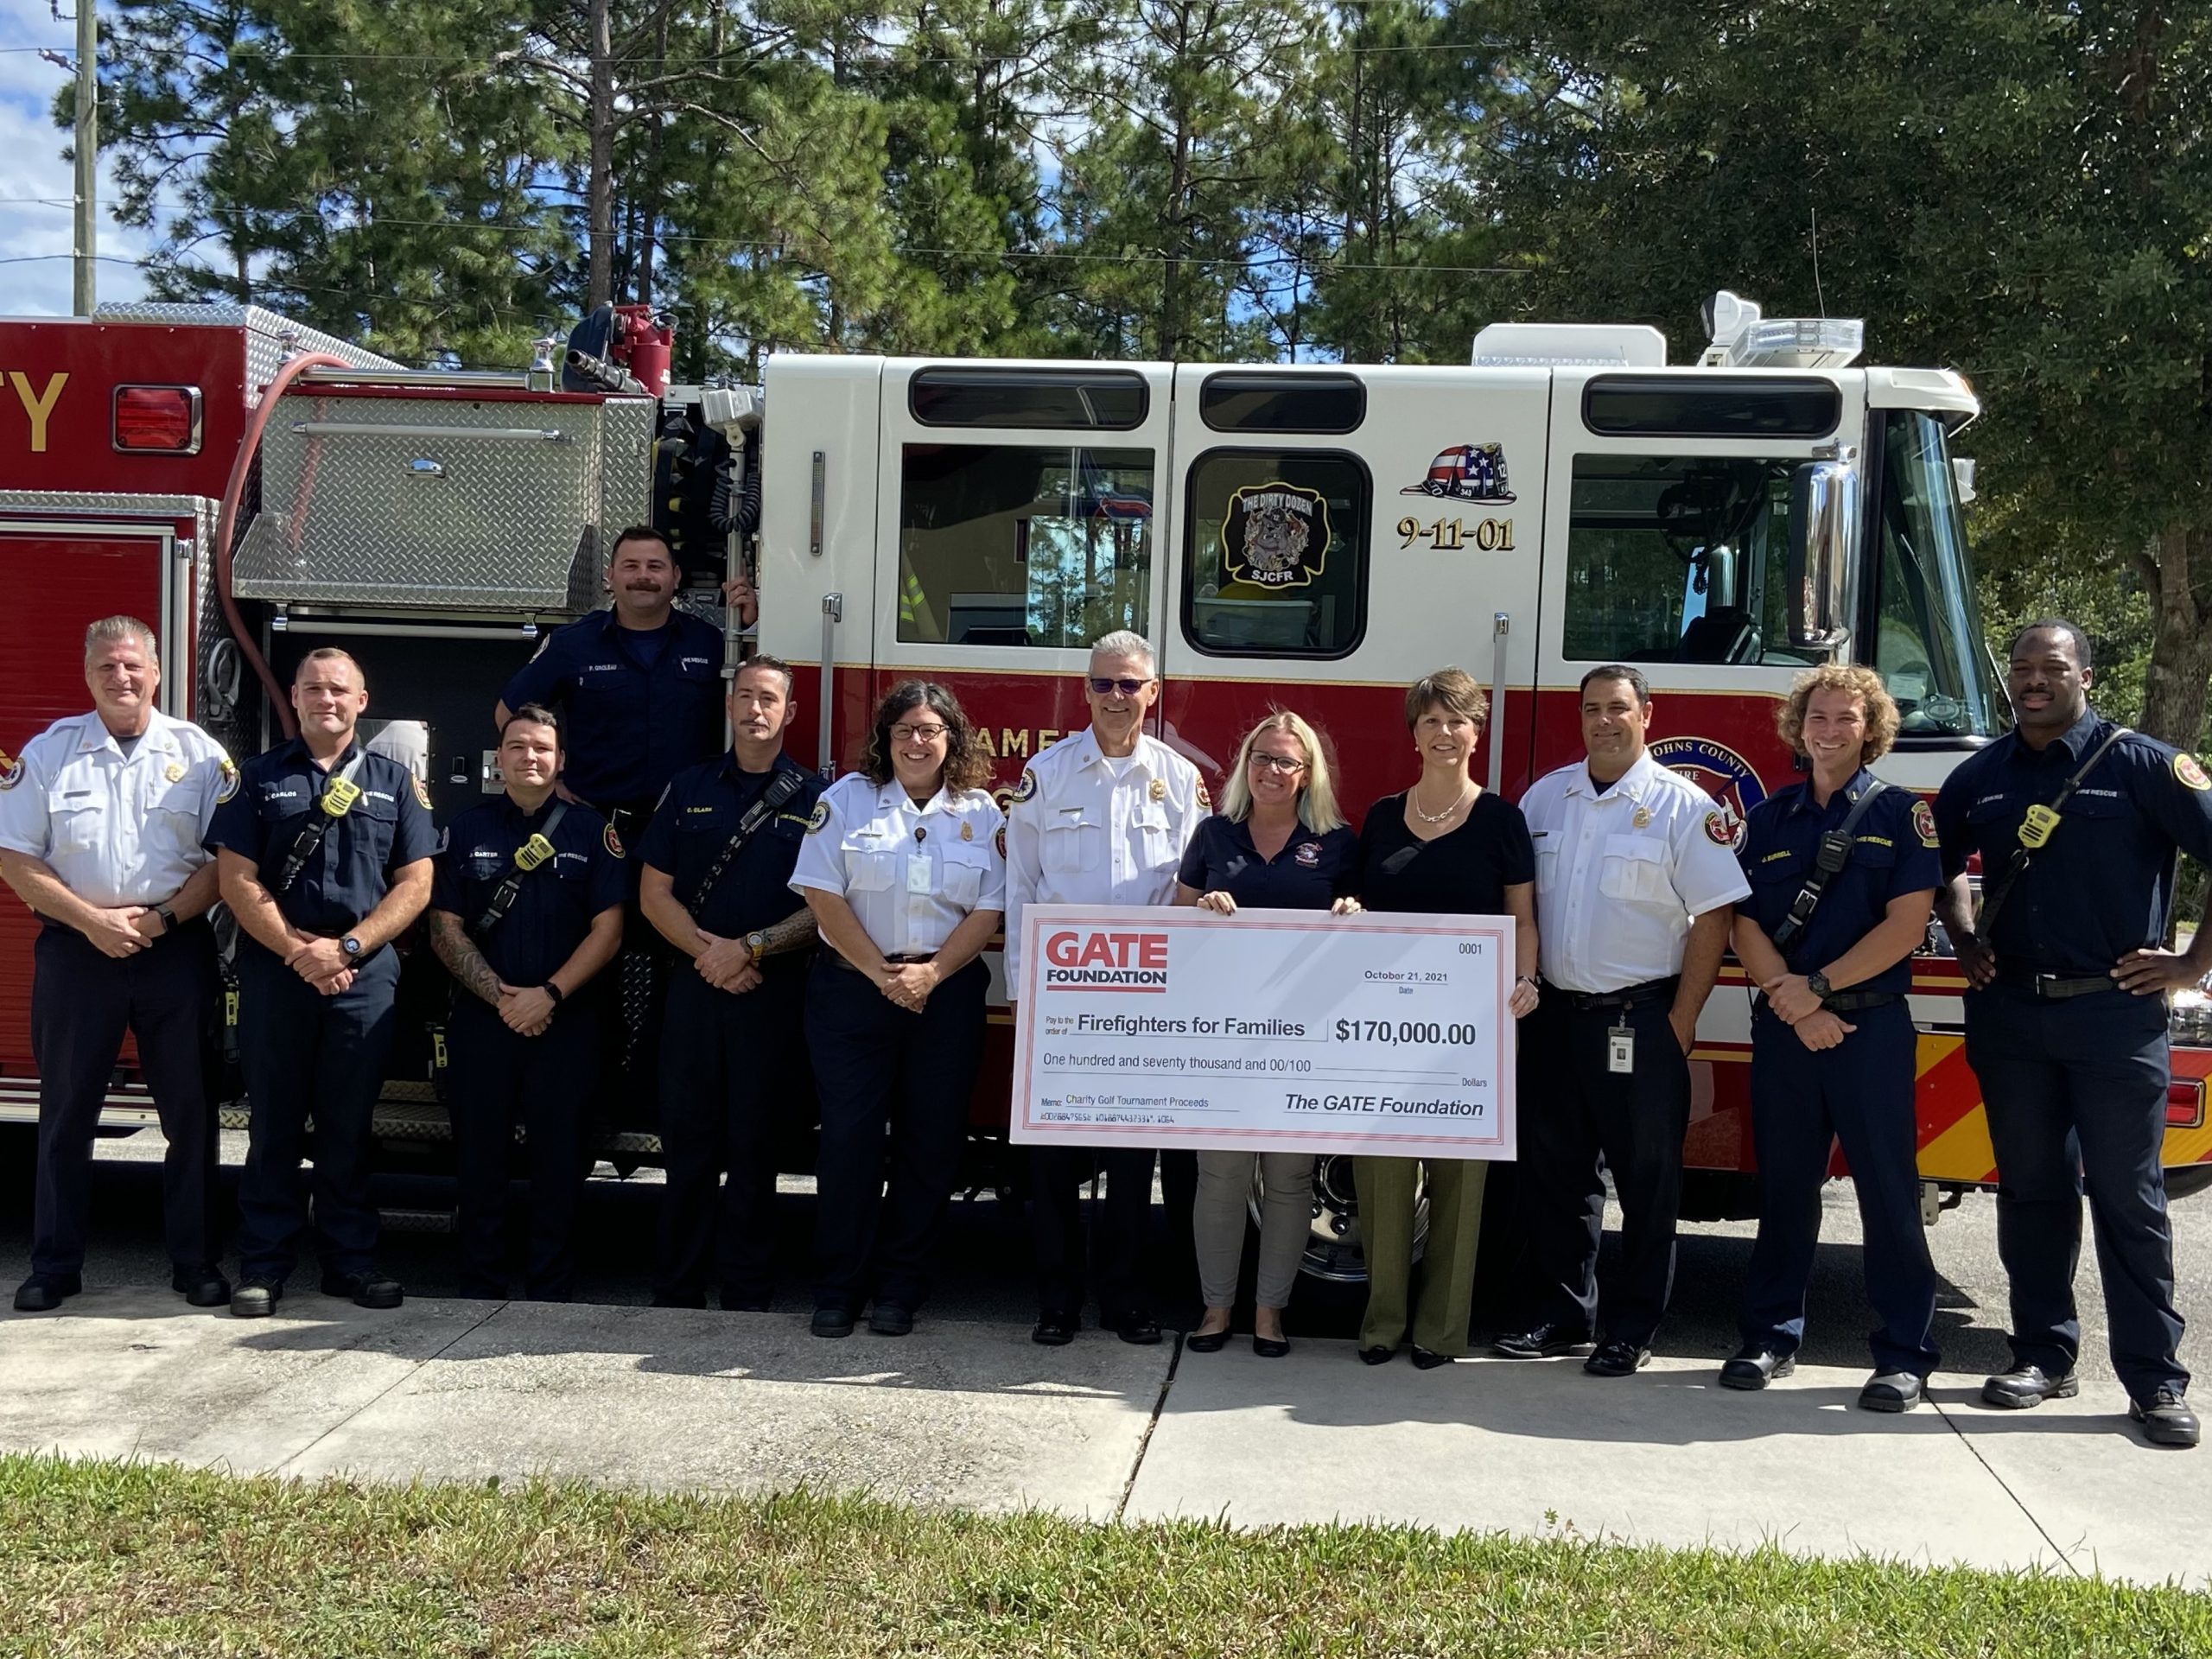 GATE 25th Annual Charity Golf Tournament Raises $170,000 for Firefighters for Families, Inc.